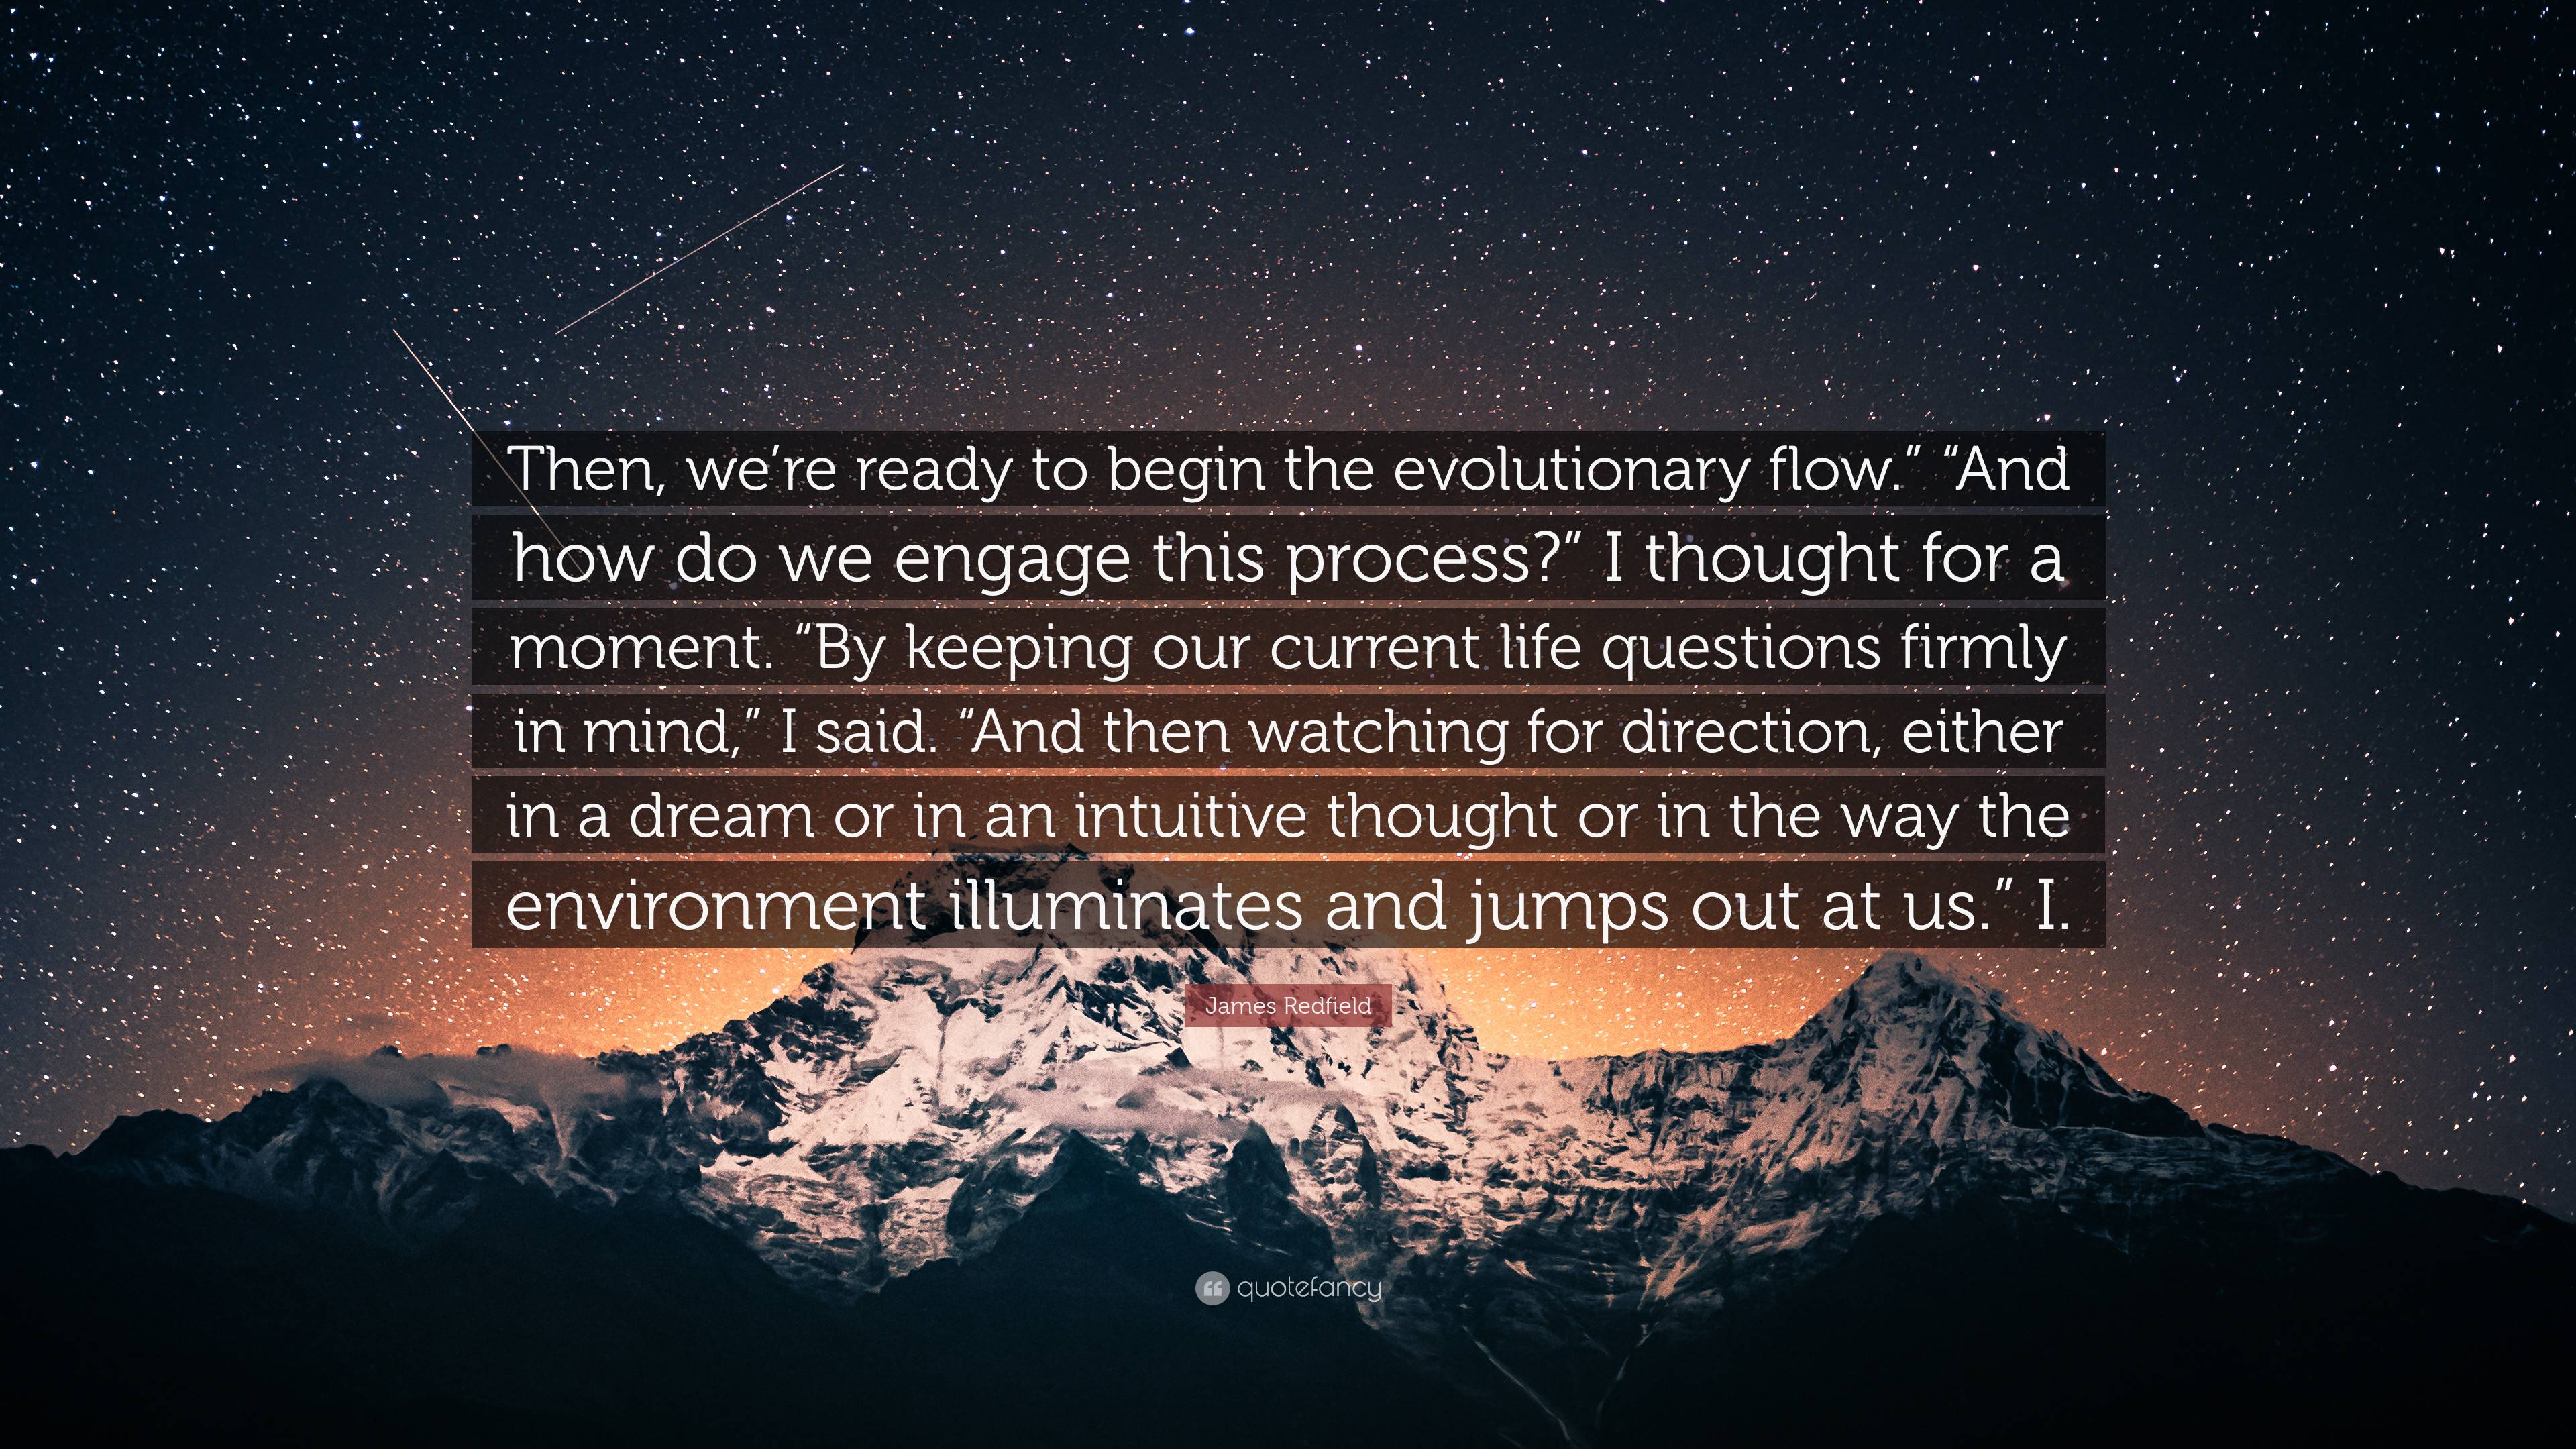 7095228 James Redfield Quote Then we re ready to begin the evolutionary